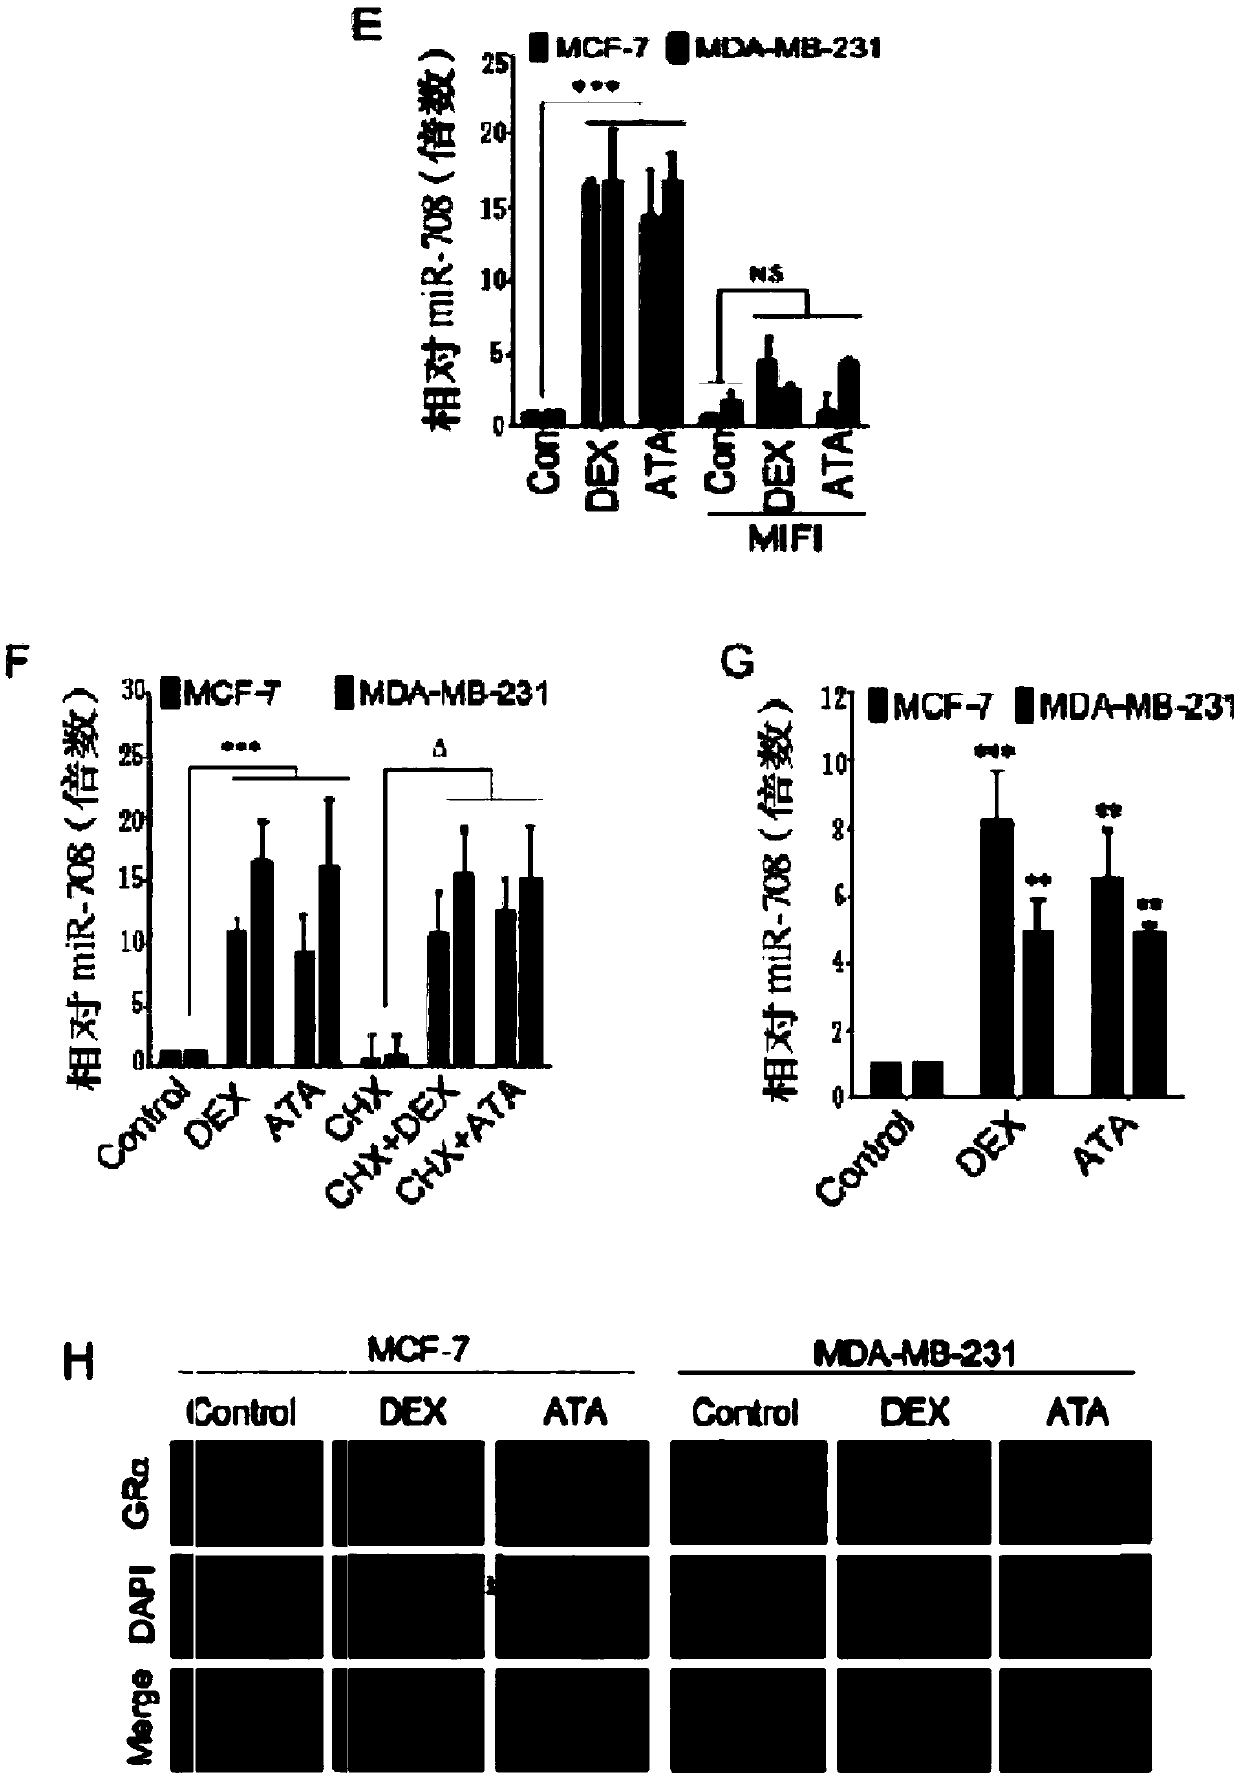 Application of glucocorticoid receptor accelerator antcin A in inhibiting tumorigenesis and metastasis of breast cancer